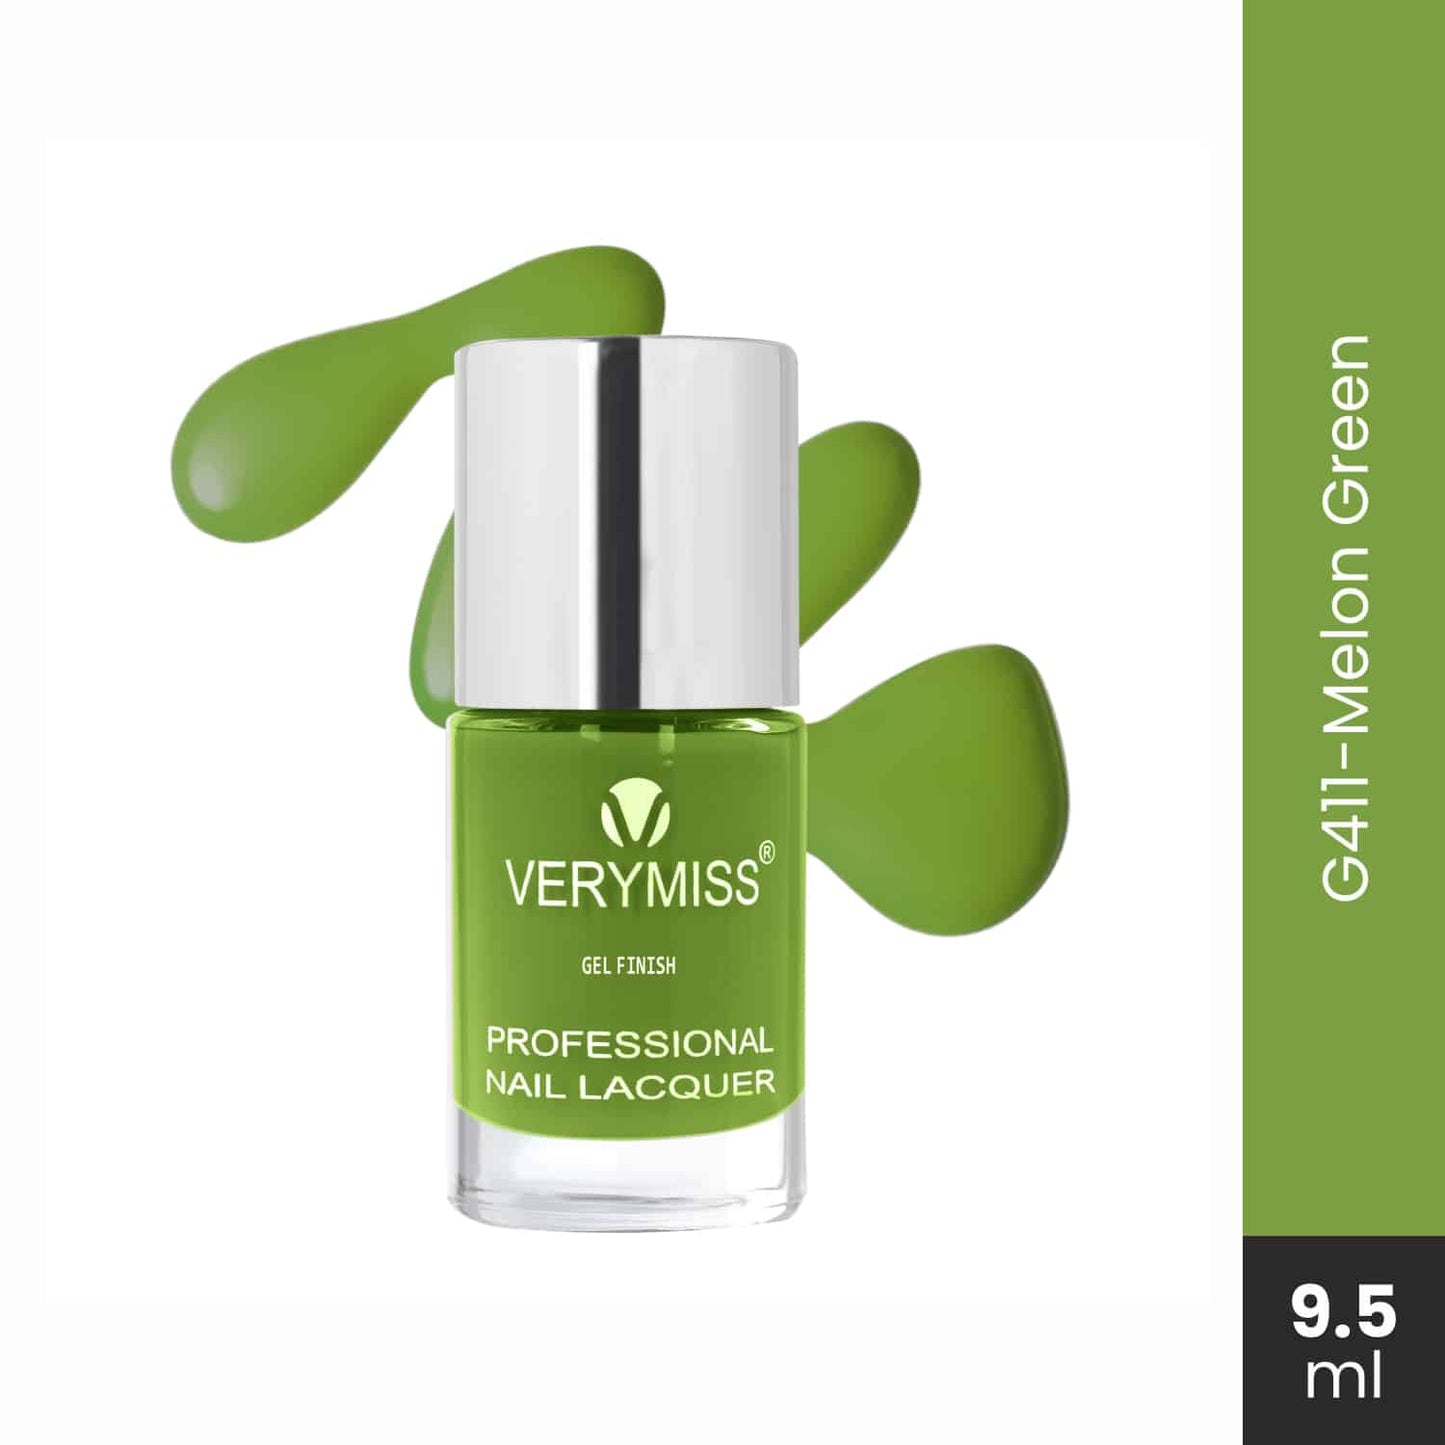 Professional Gel Nail Lacquer - G411 Melon Green